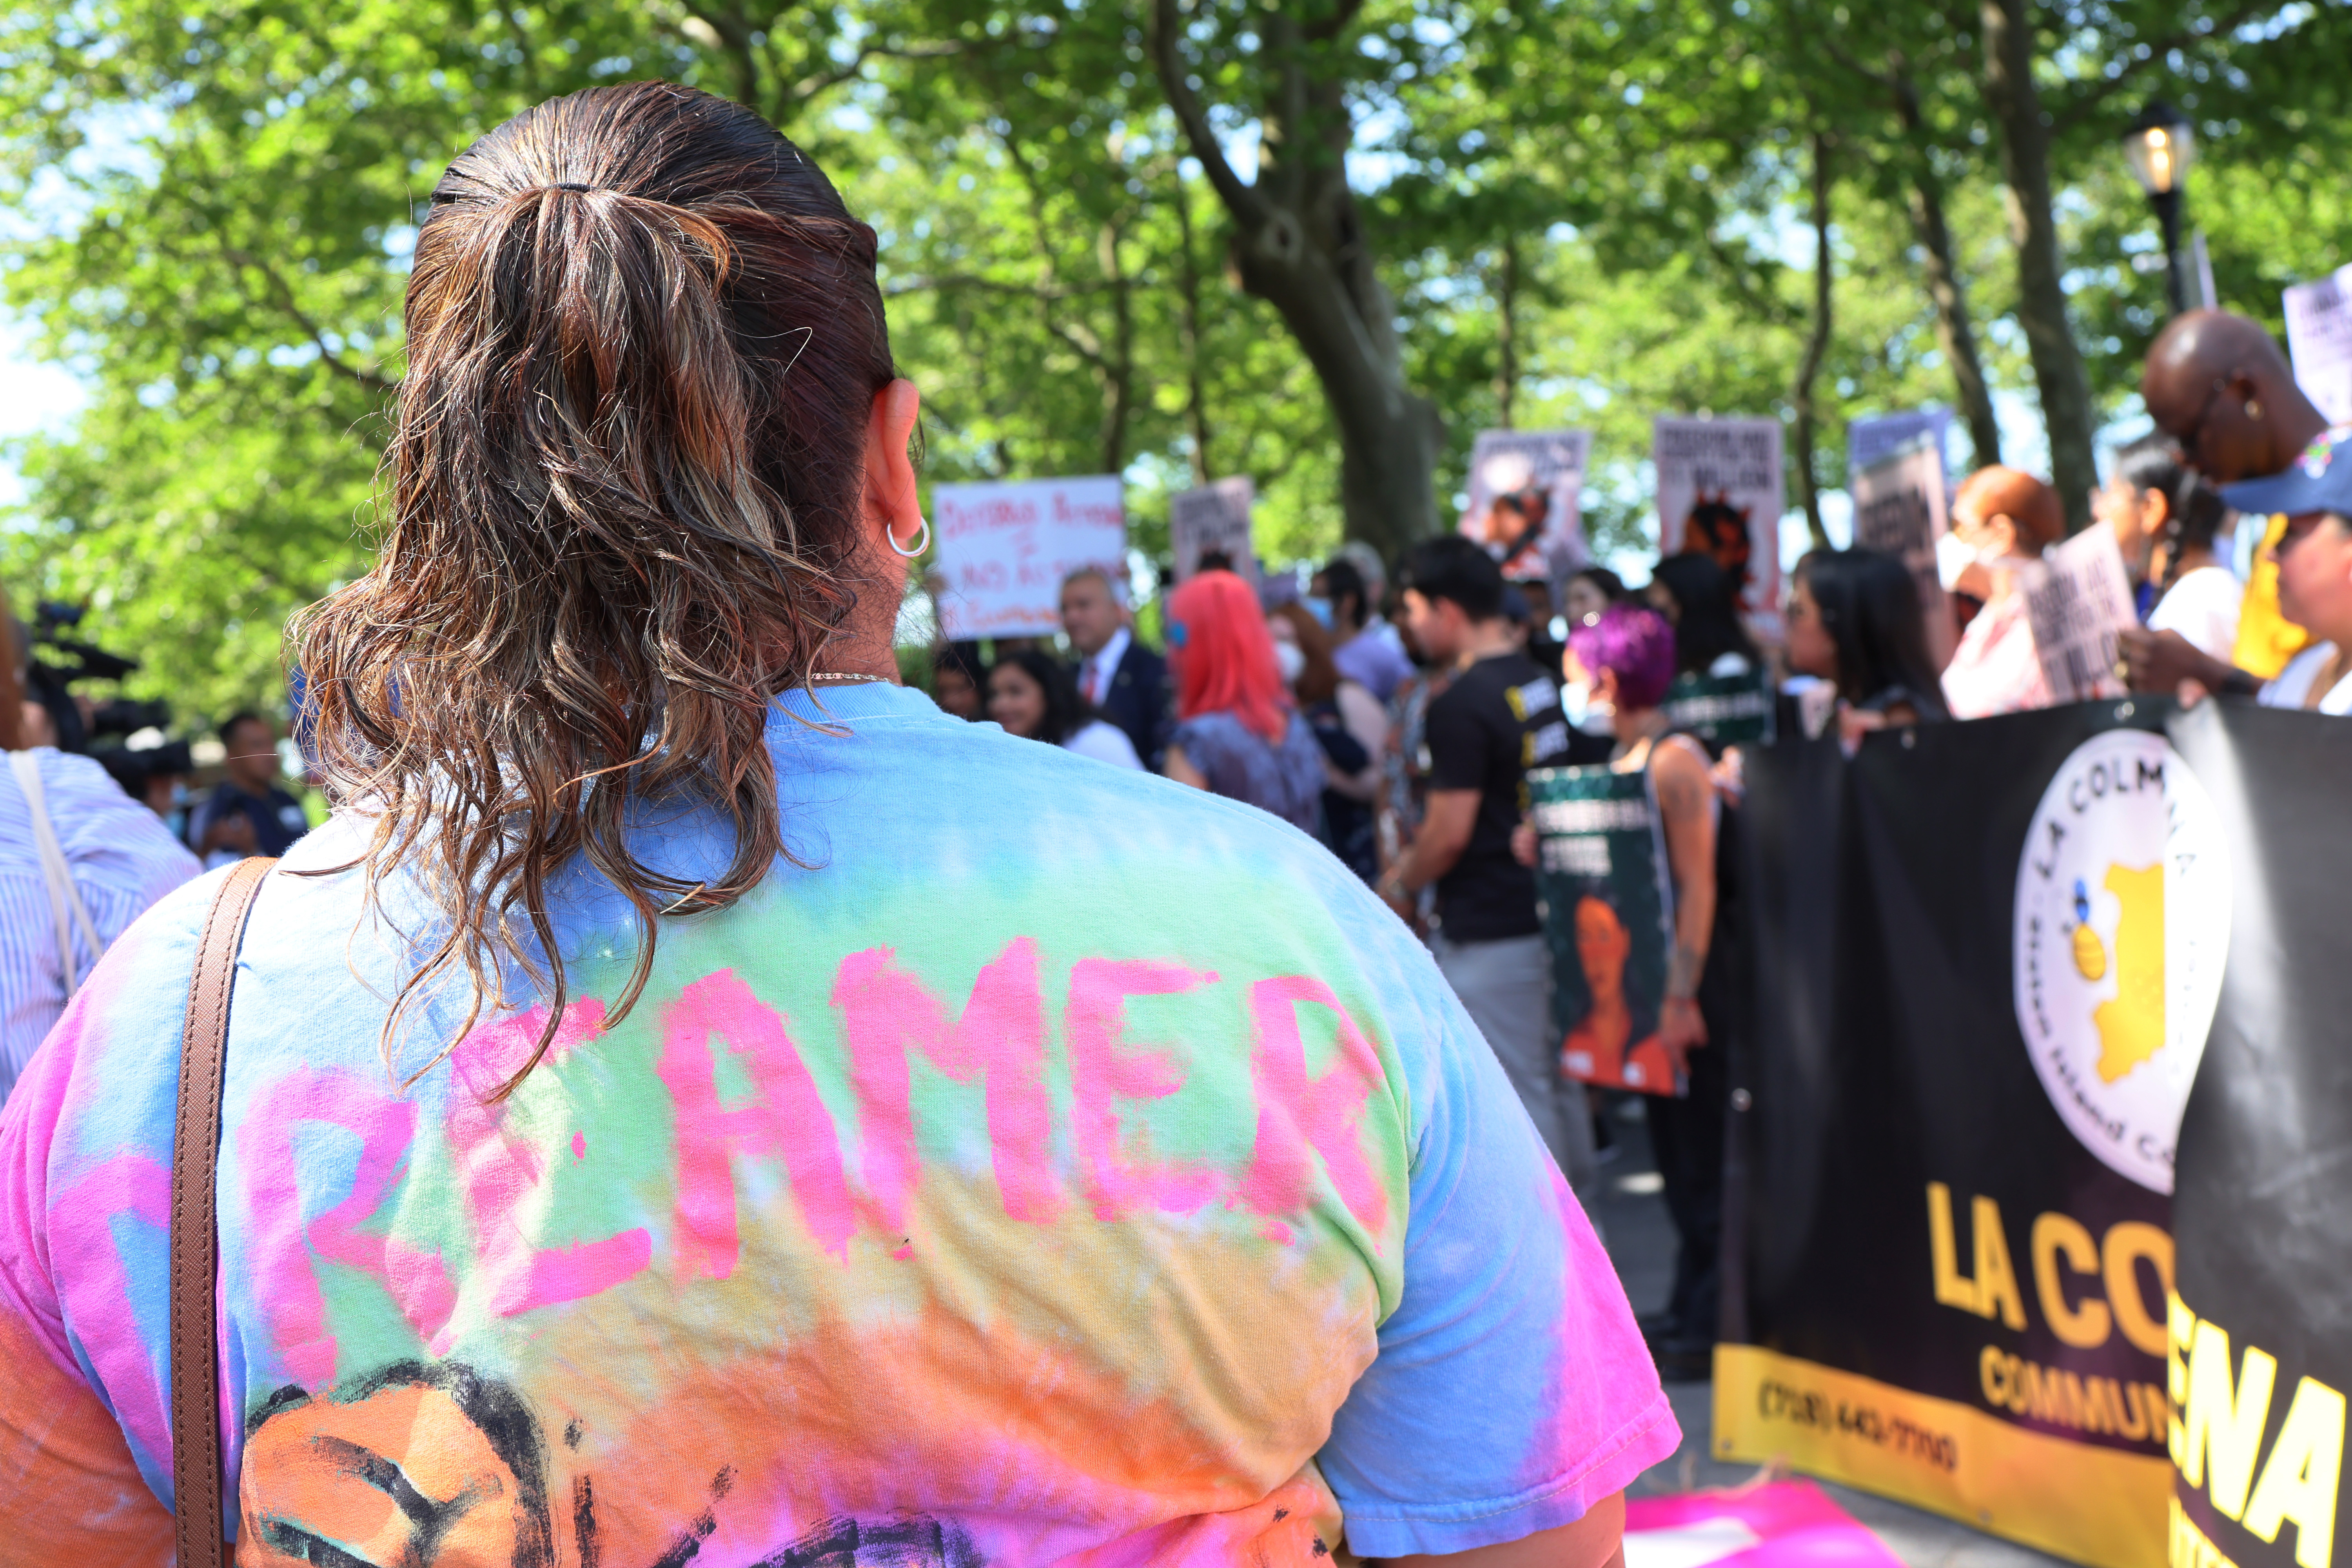 A person at an outdoor rally wearing a shirt that says “Dreamer” across the back.